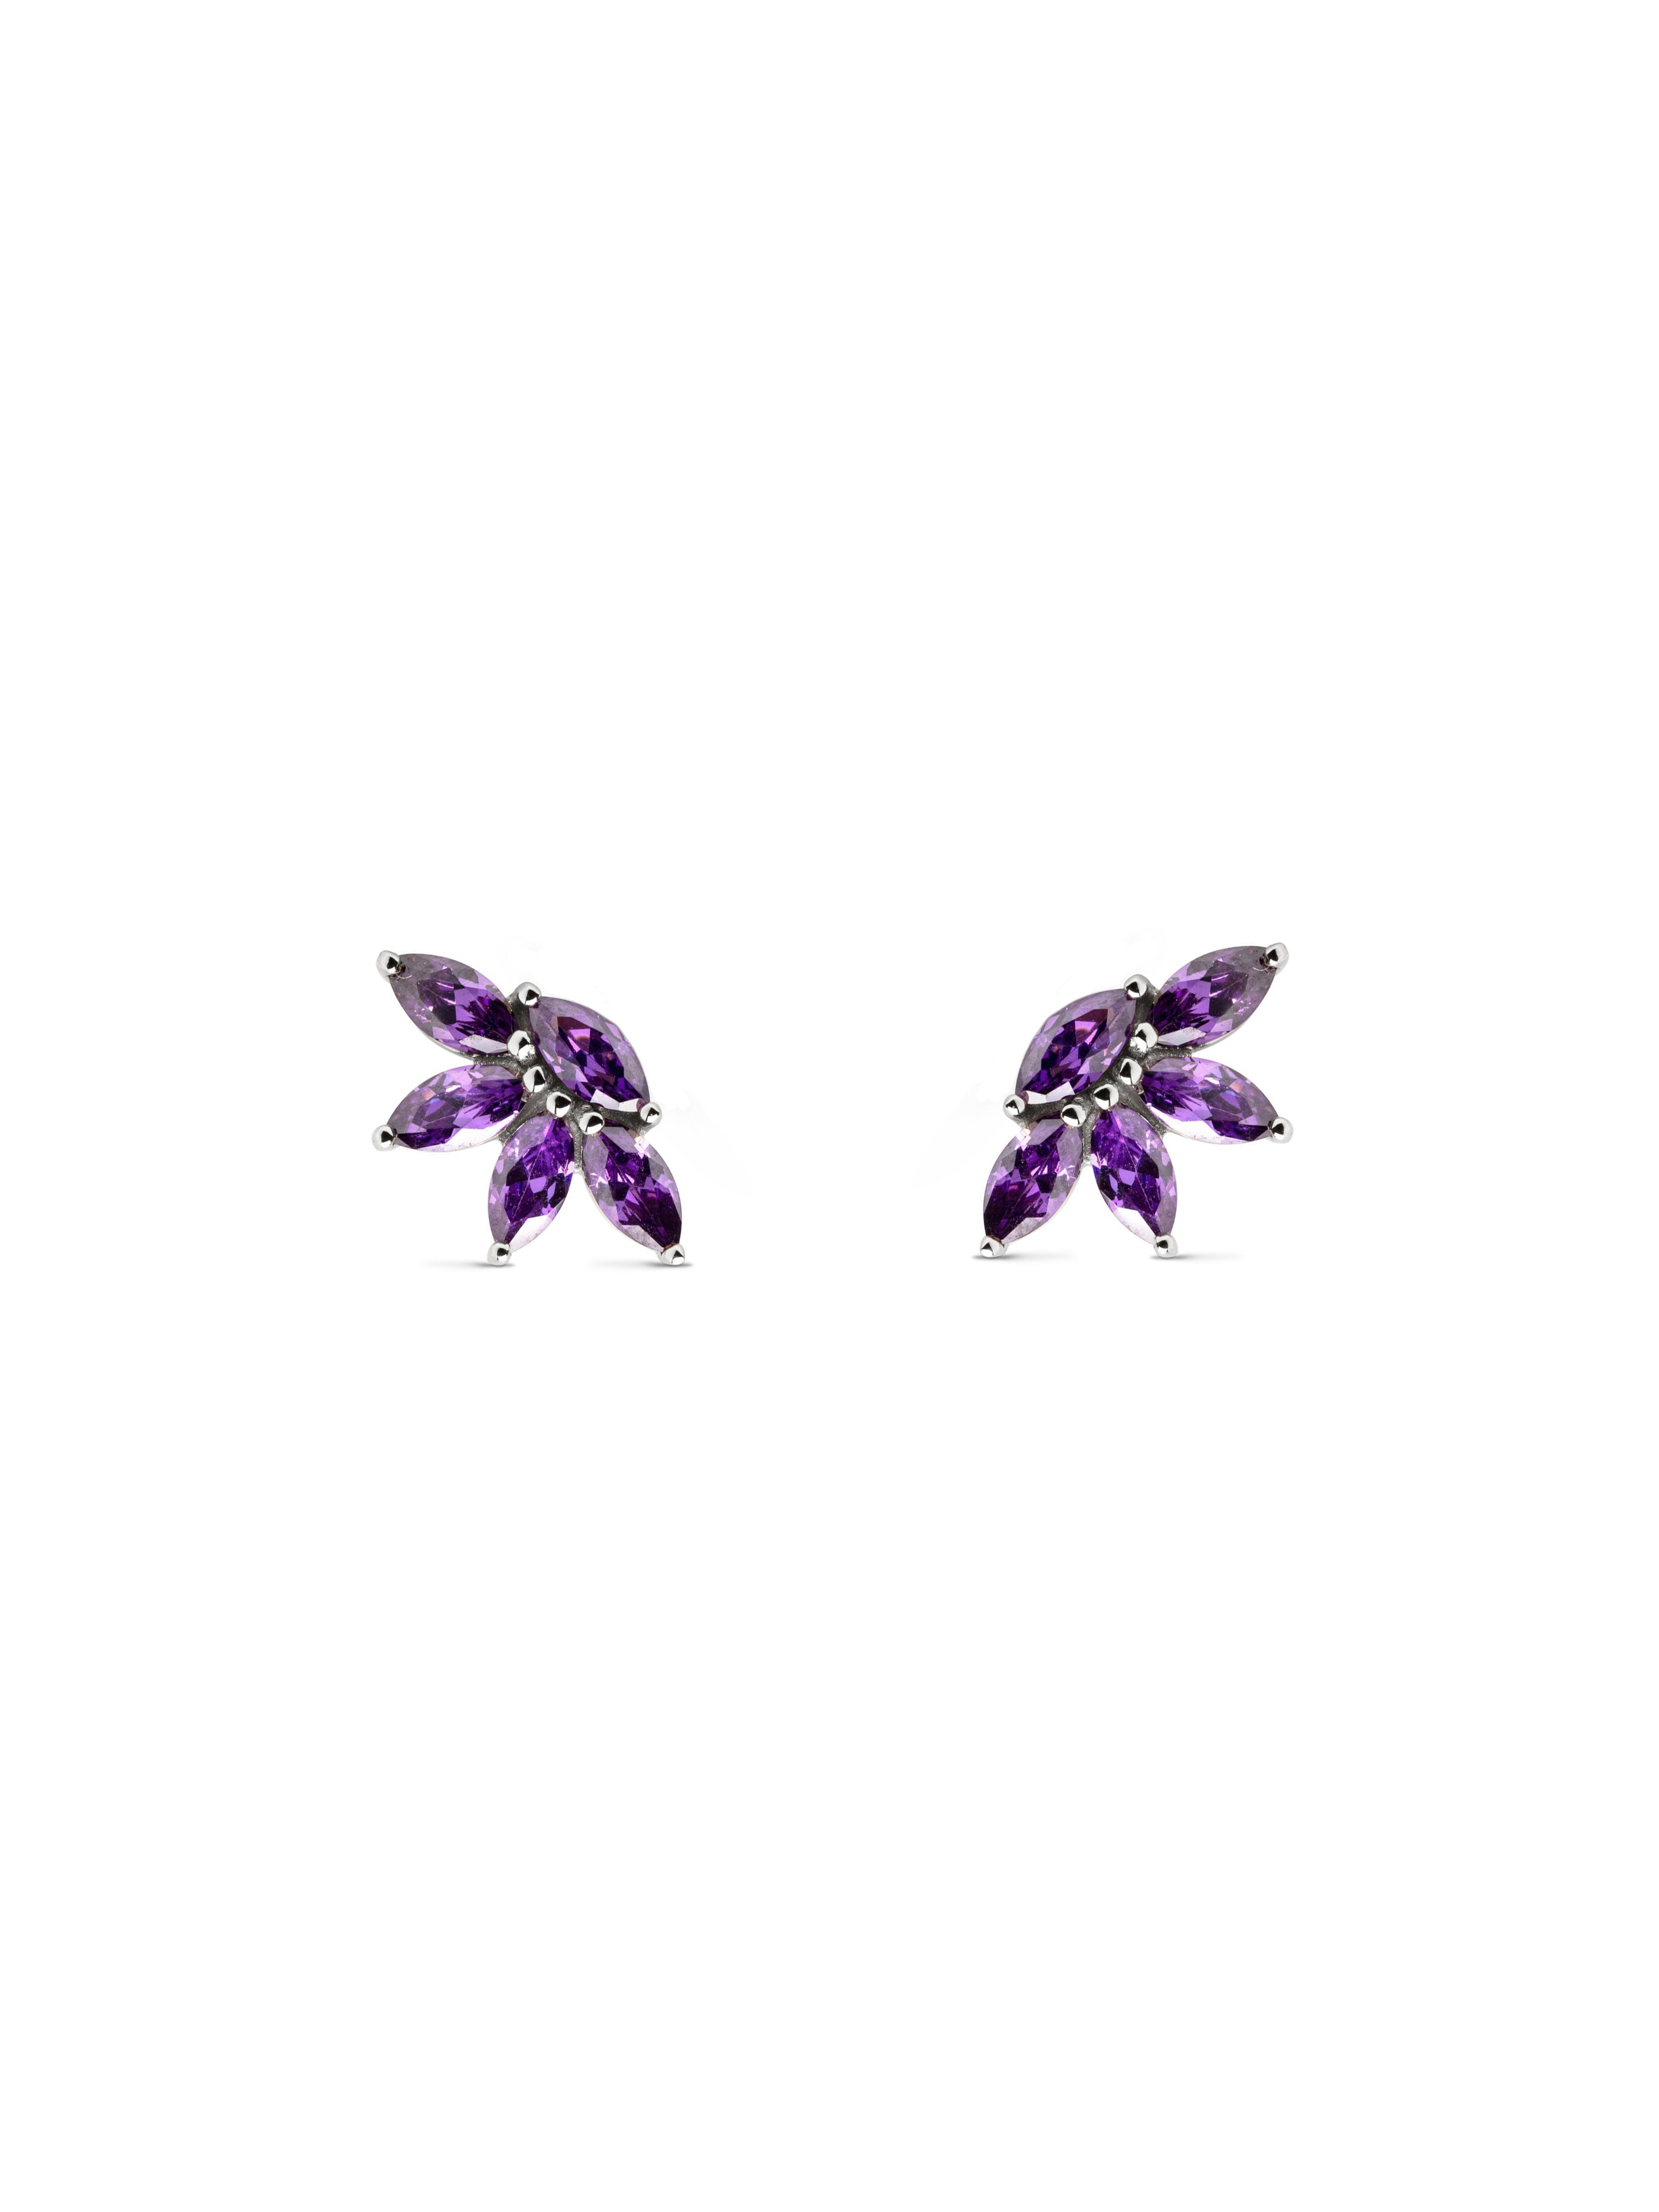 Miss Marquise Lavender Silver Earrings